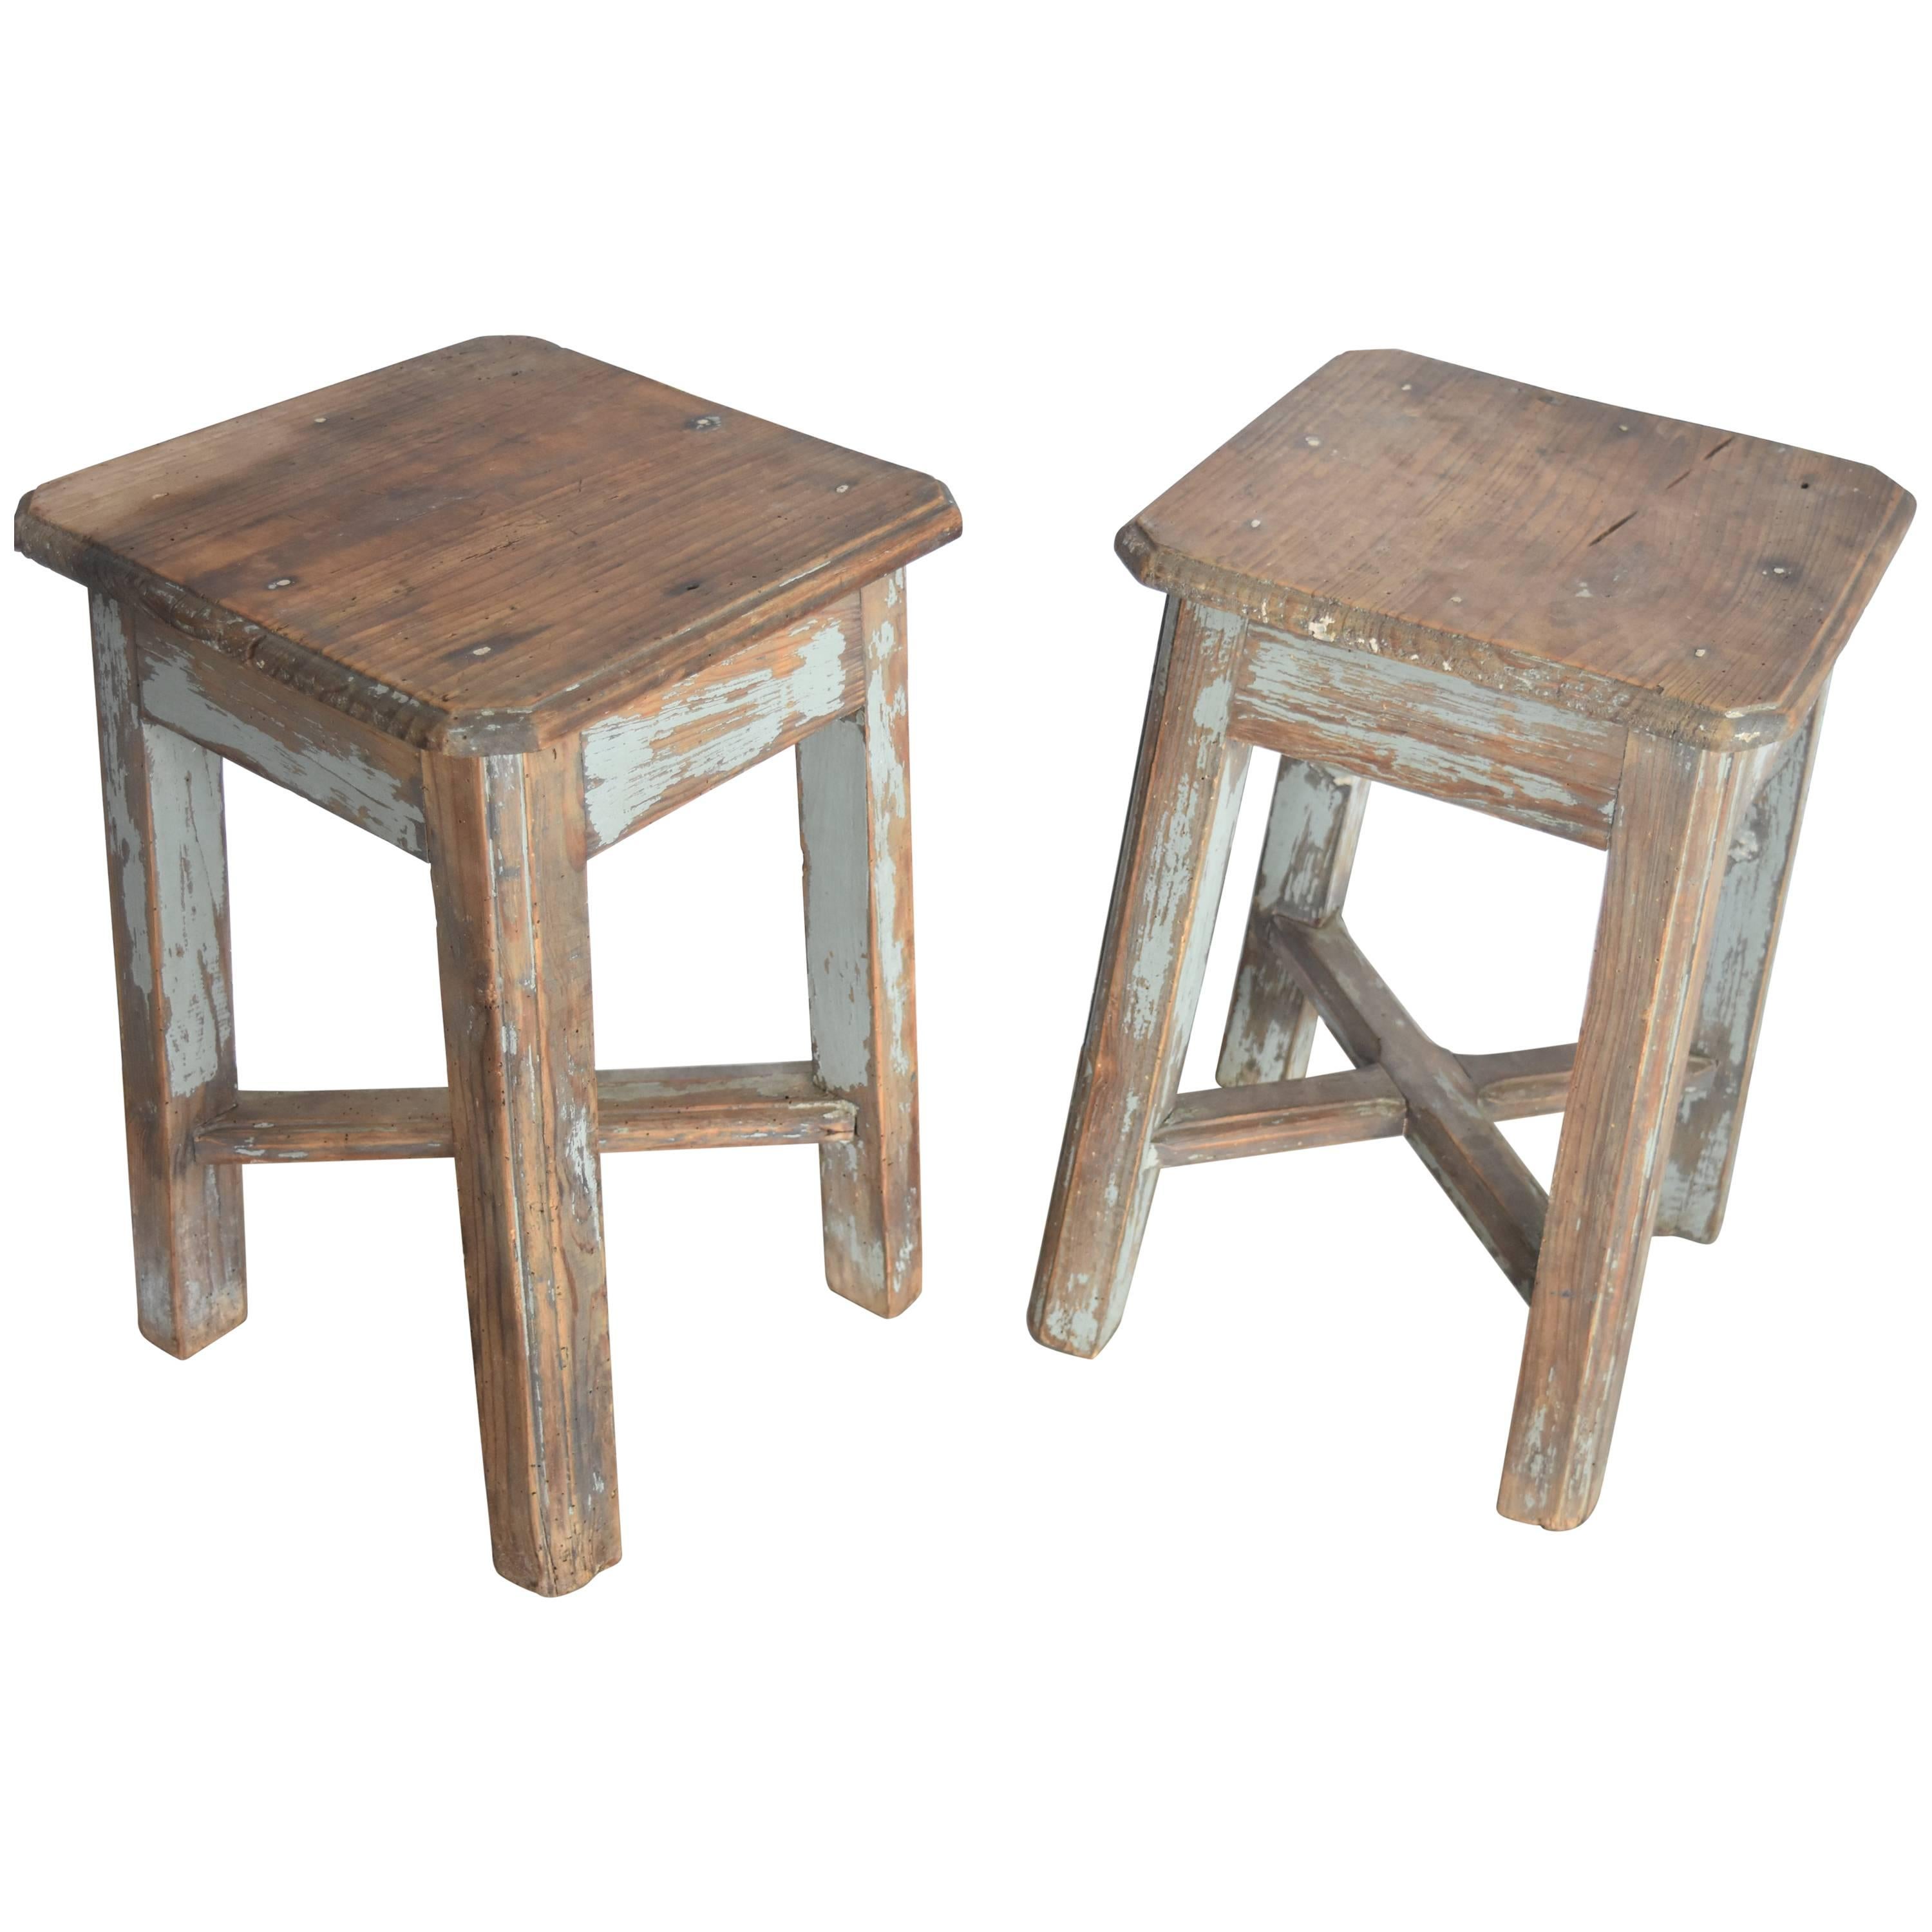 French Oak Painted Pair of Stools, circa 1900